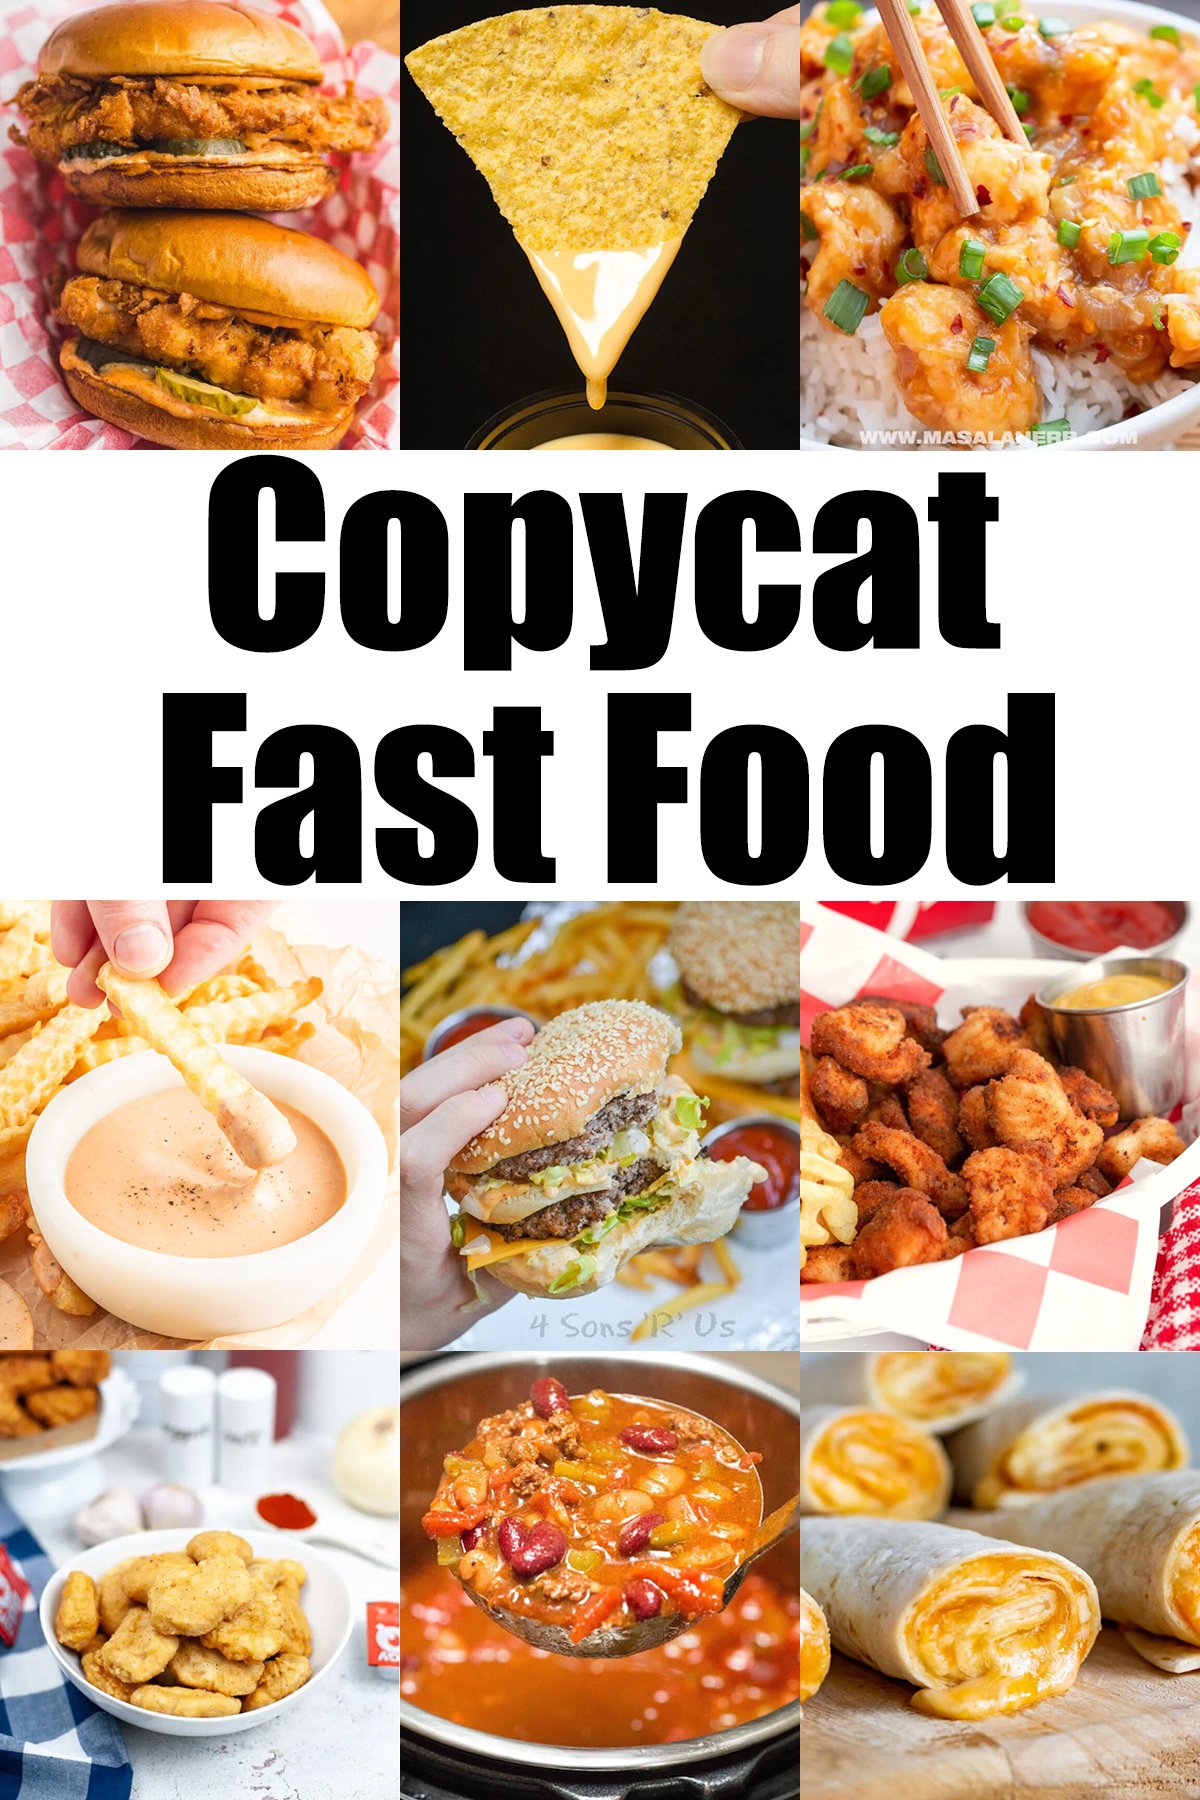 A photo collage showing nine copycat fast food recipes. Text in the middle reads "Copycat Fast Food".